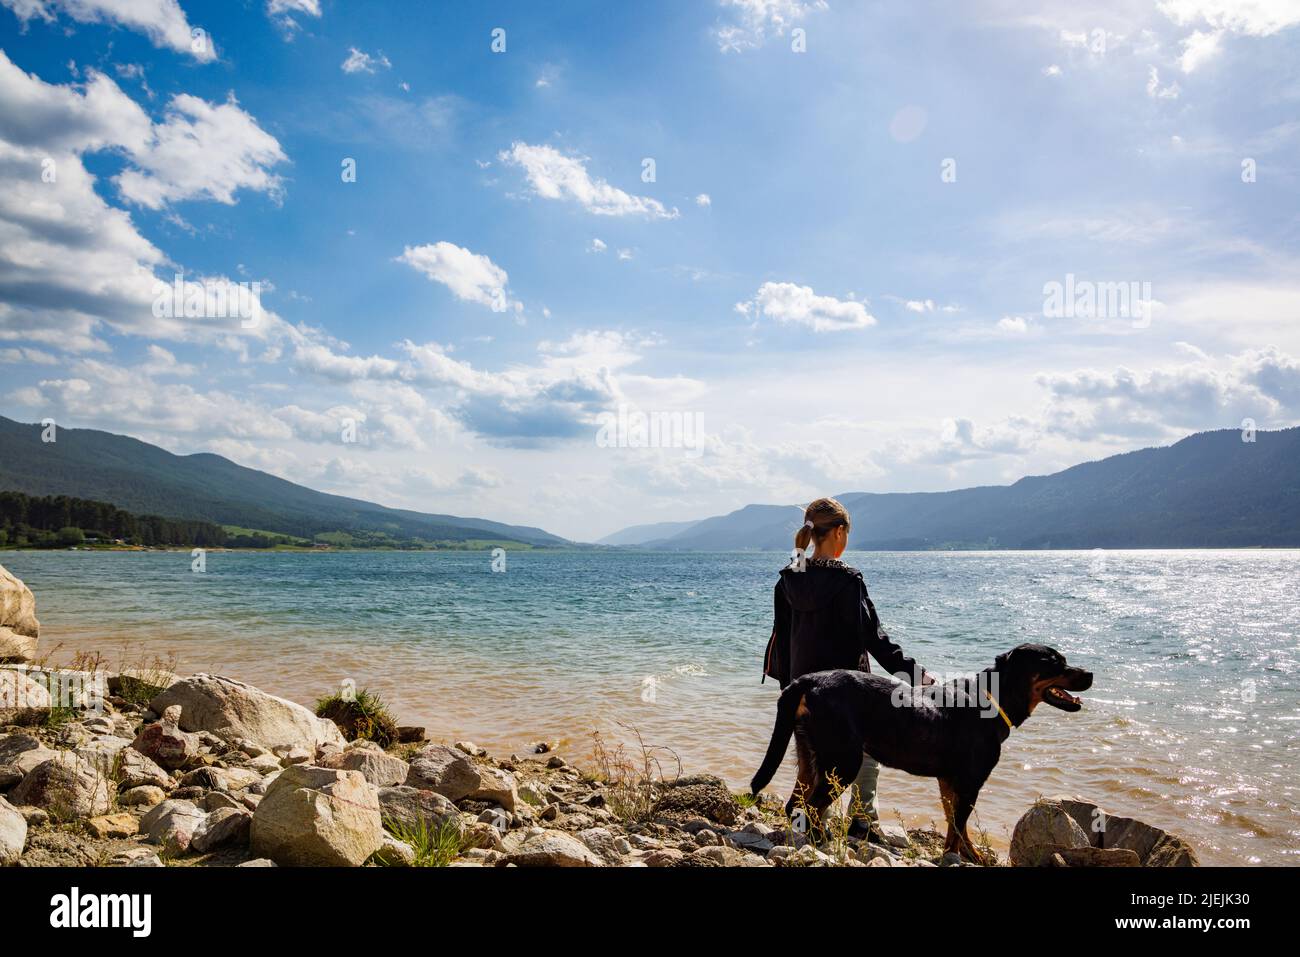 Little girl stands near her big dog friend of Rottweiler breed on empty wild rocky shore near transparent turquoise lake, against backdrop of green Rh Stock Photo